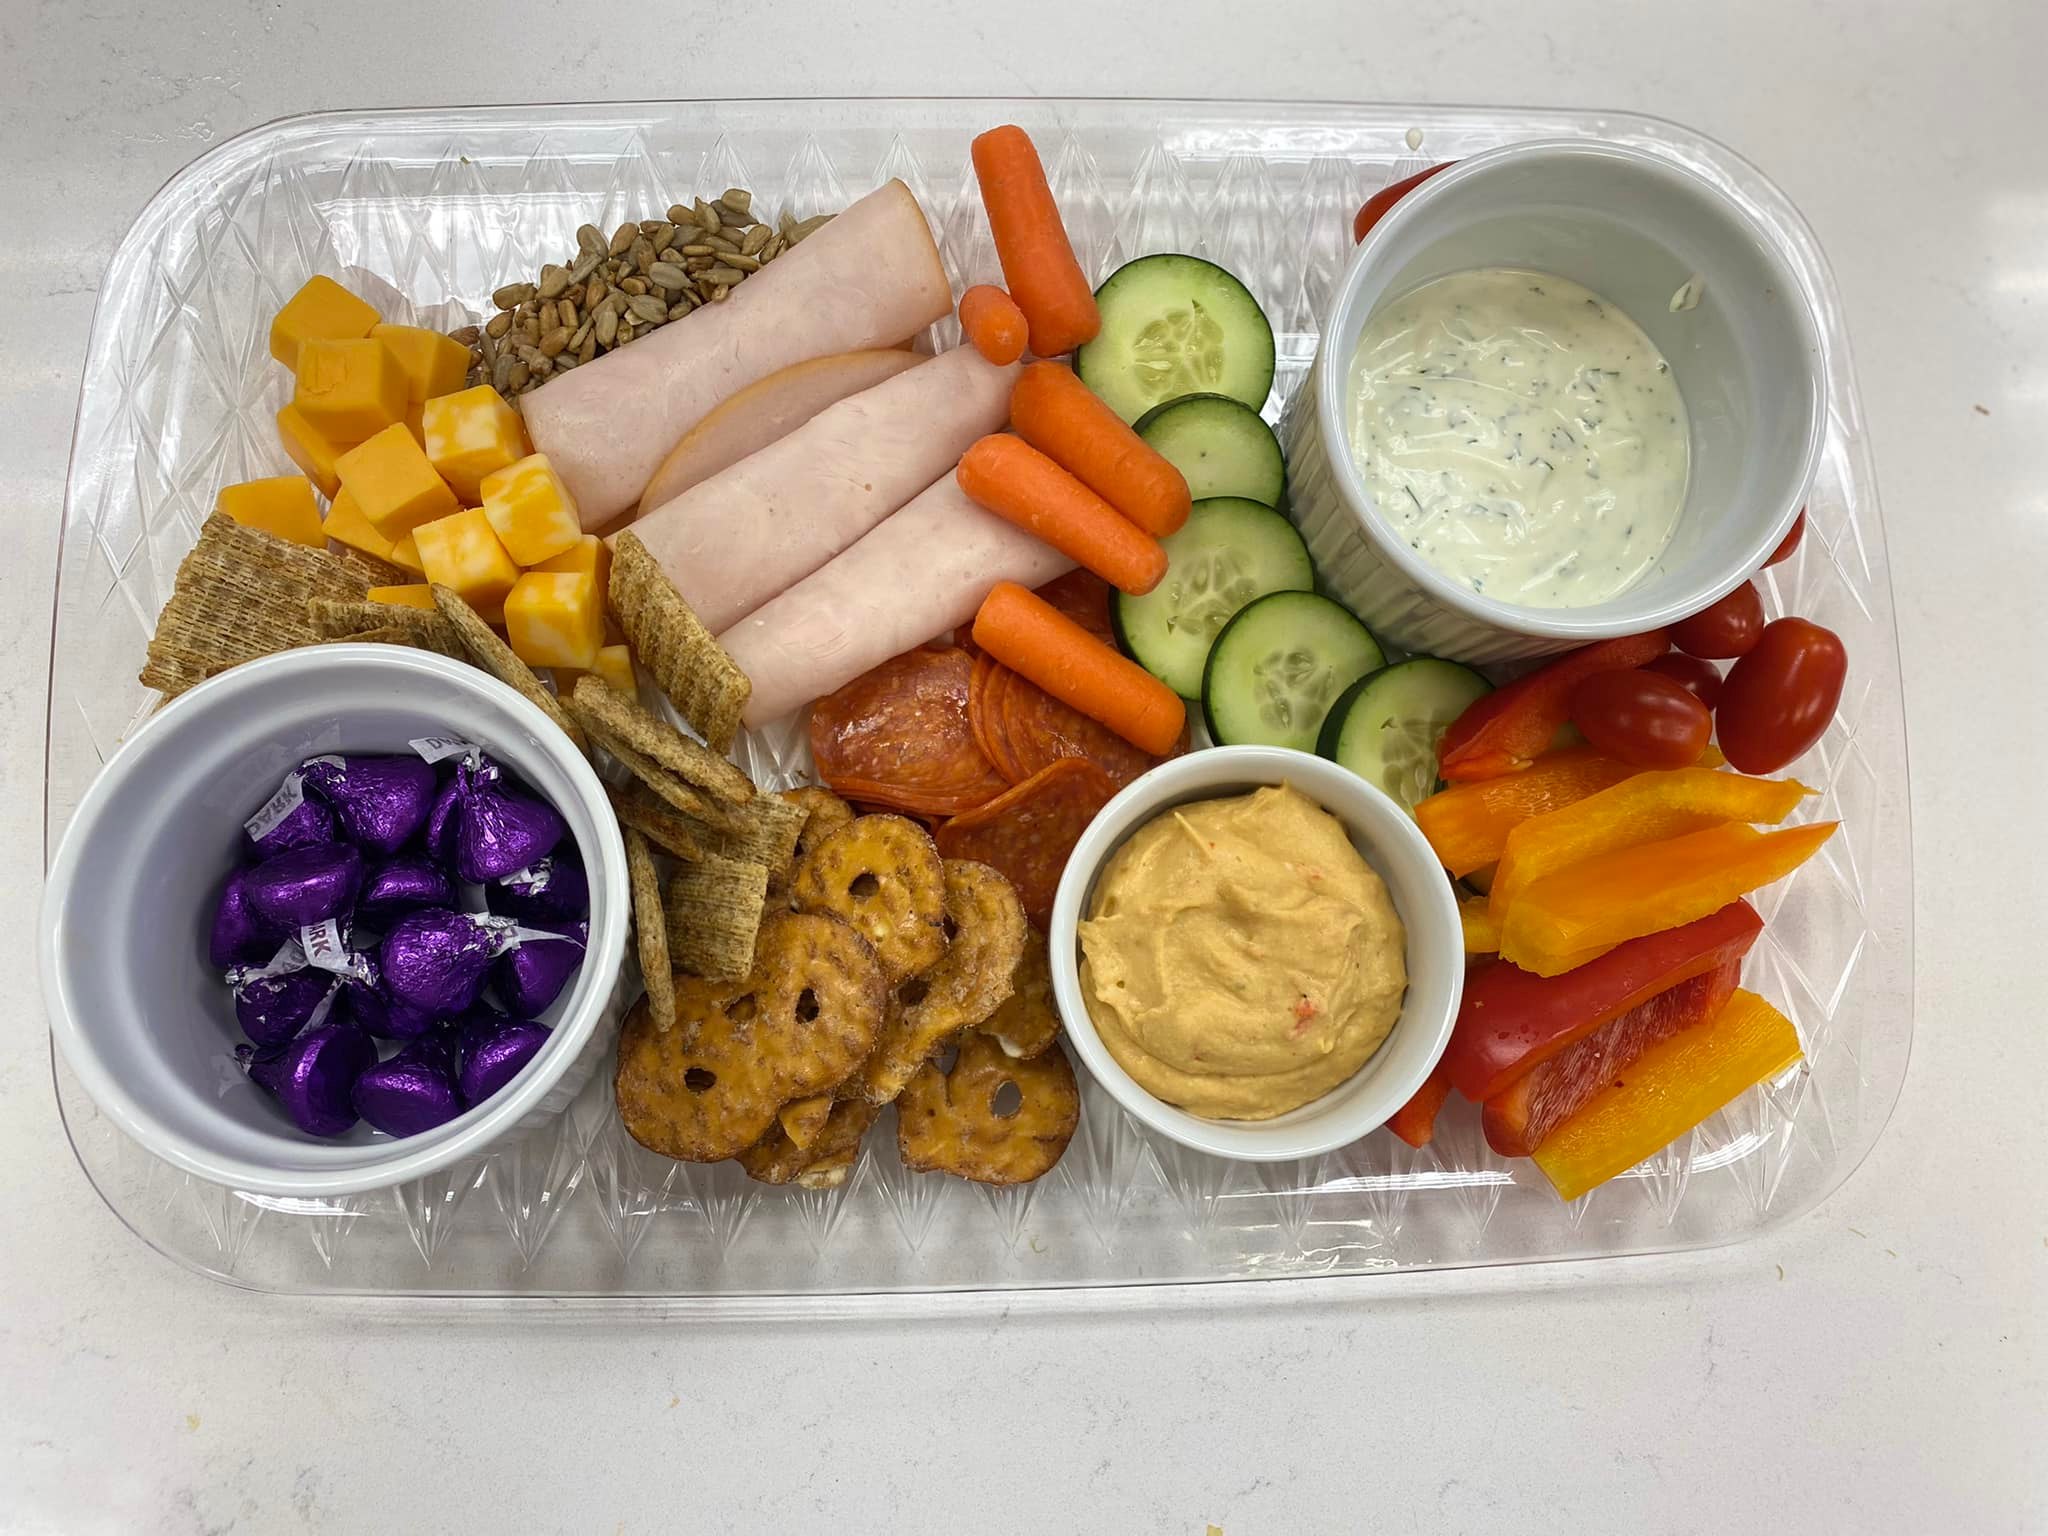 Charcuterie Board. Board with various foods including pretzels, hummus, homeade ranch, turkey, cheese, carrots, cucumbers, and sunflower seeds.